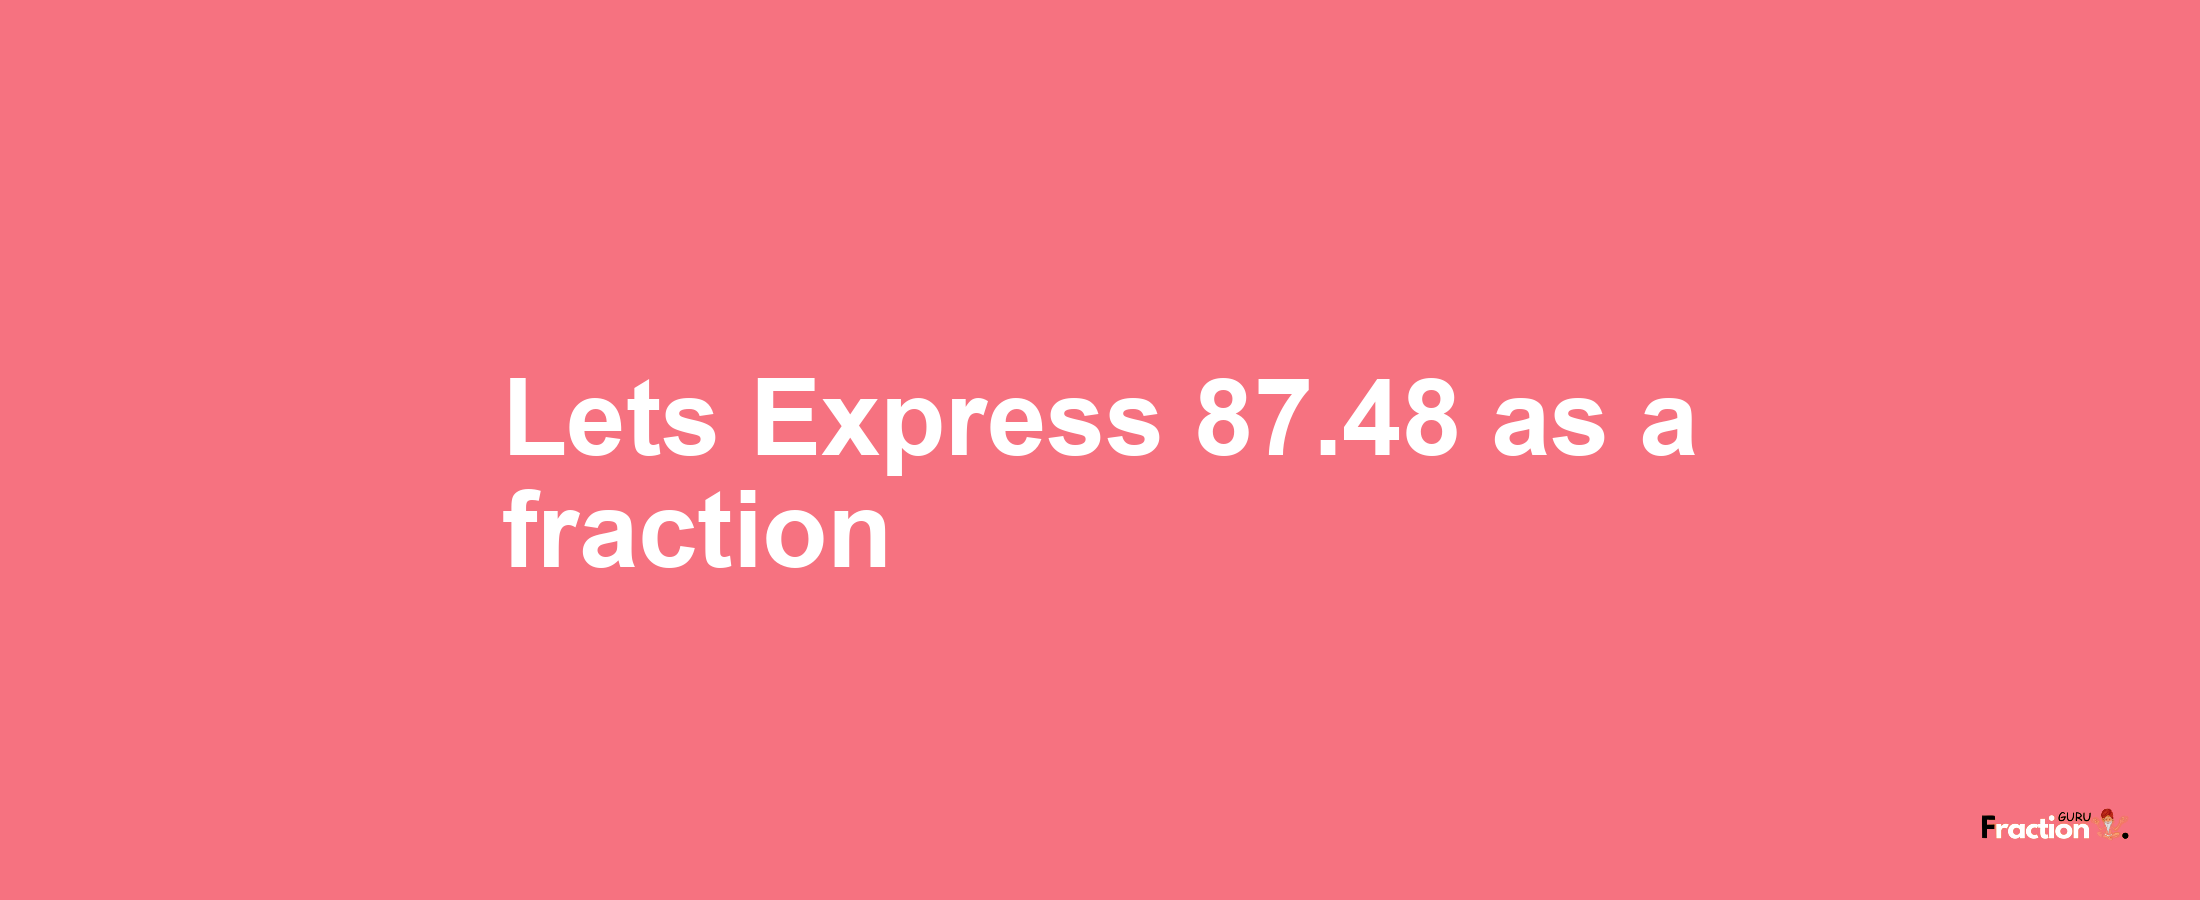 Lets Express 87.48 as afraction